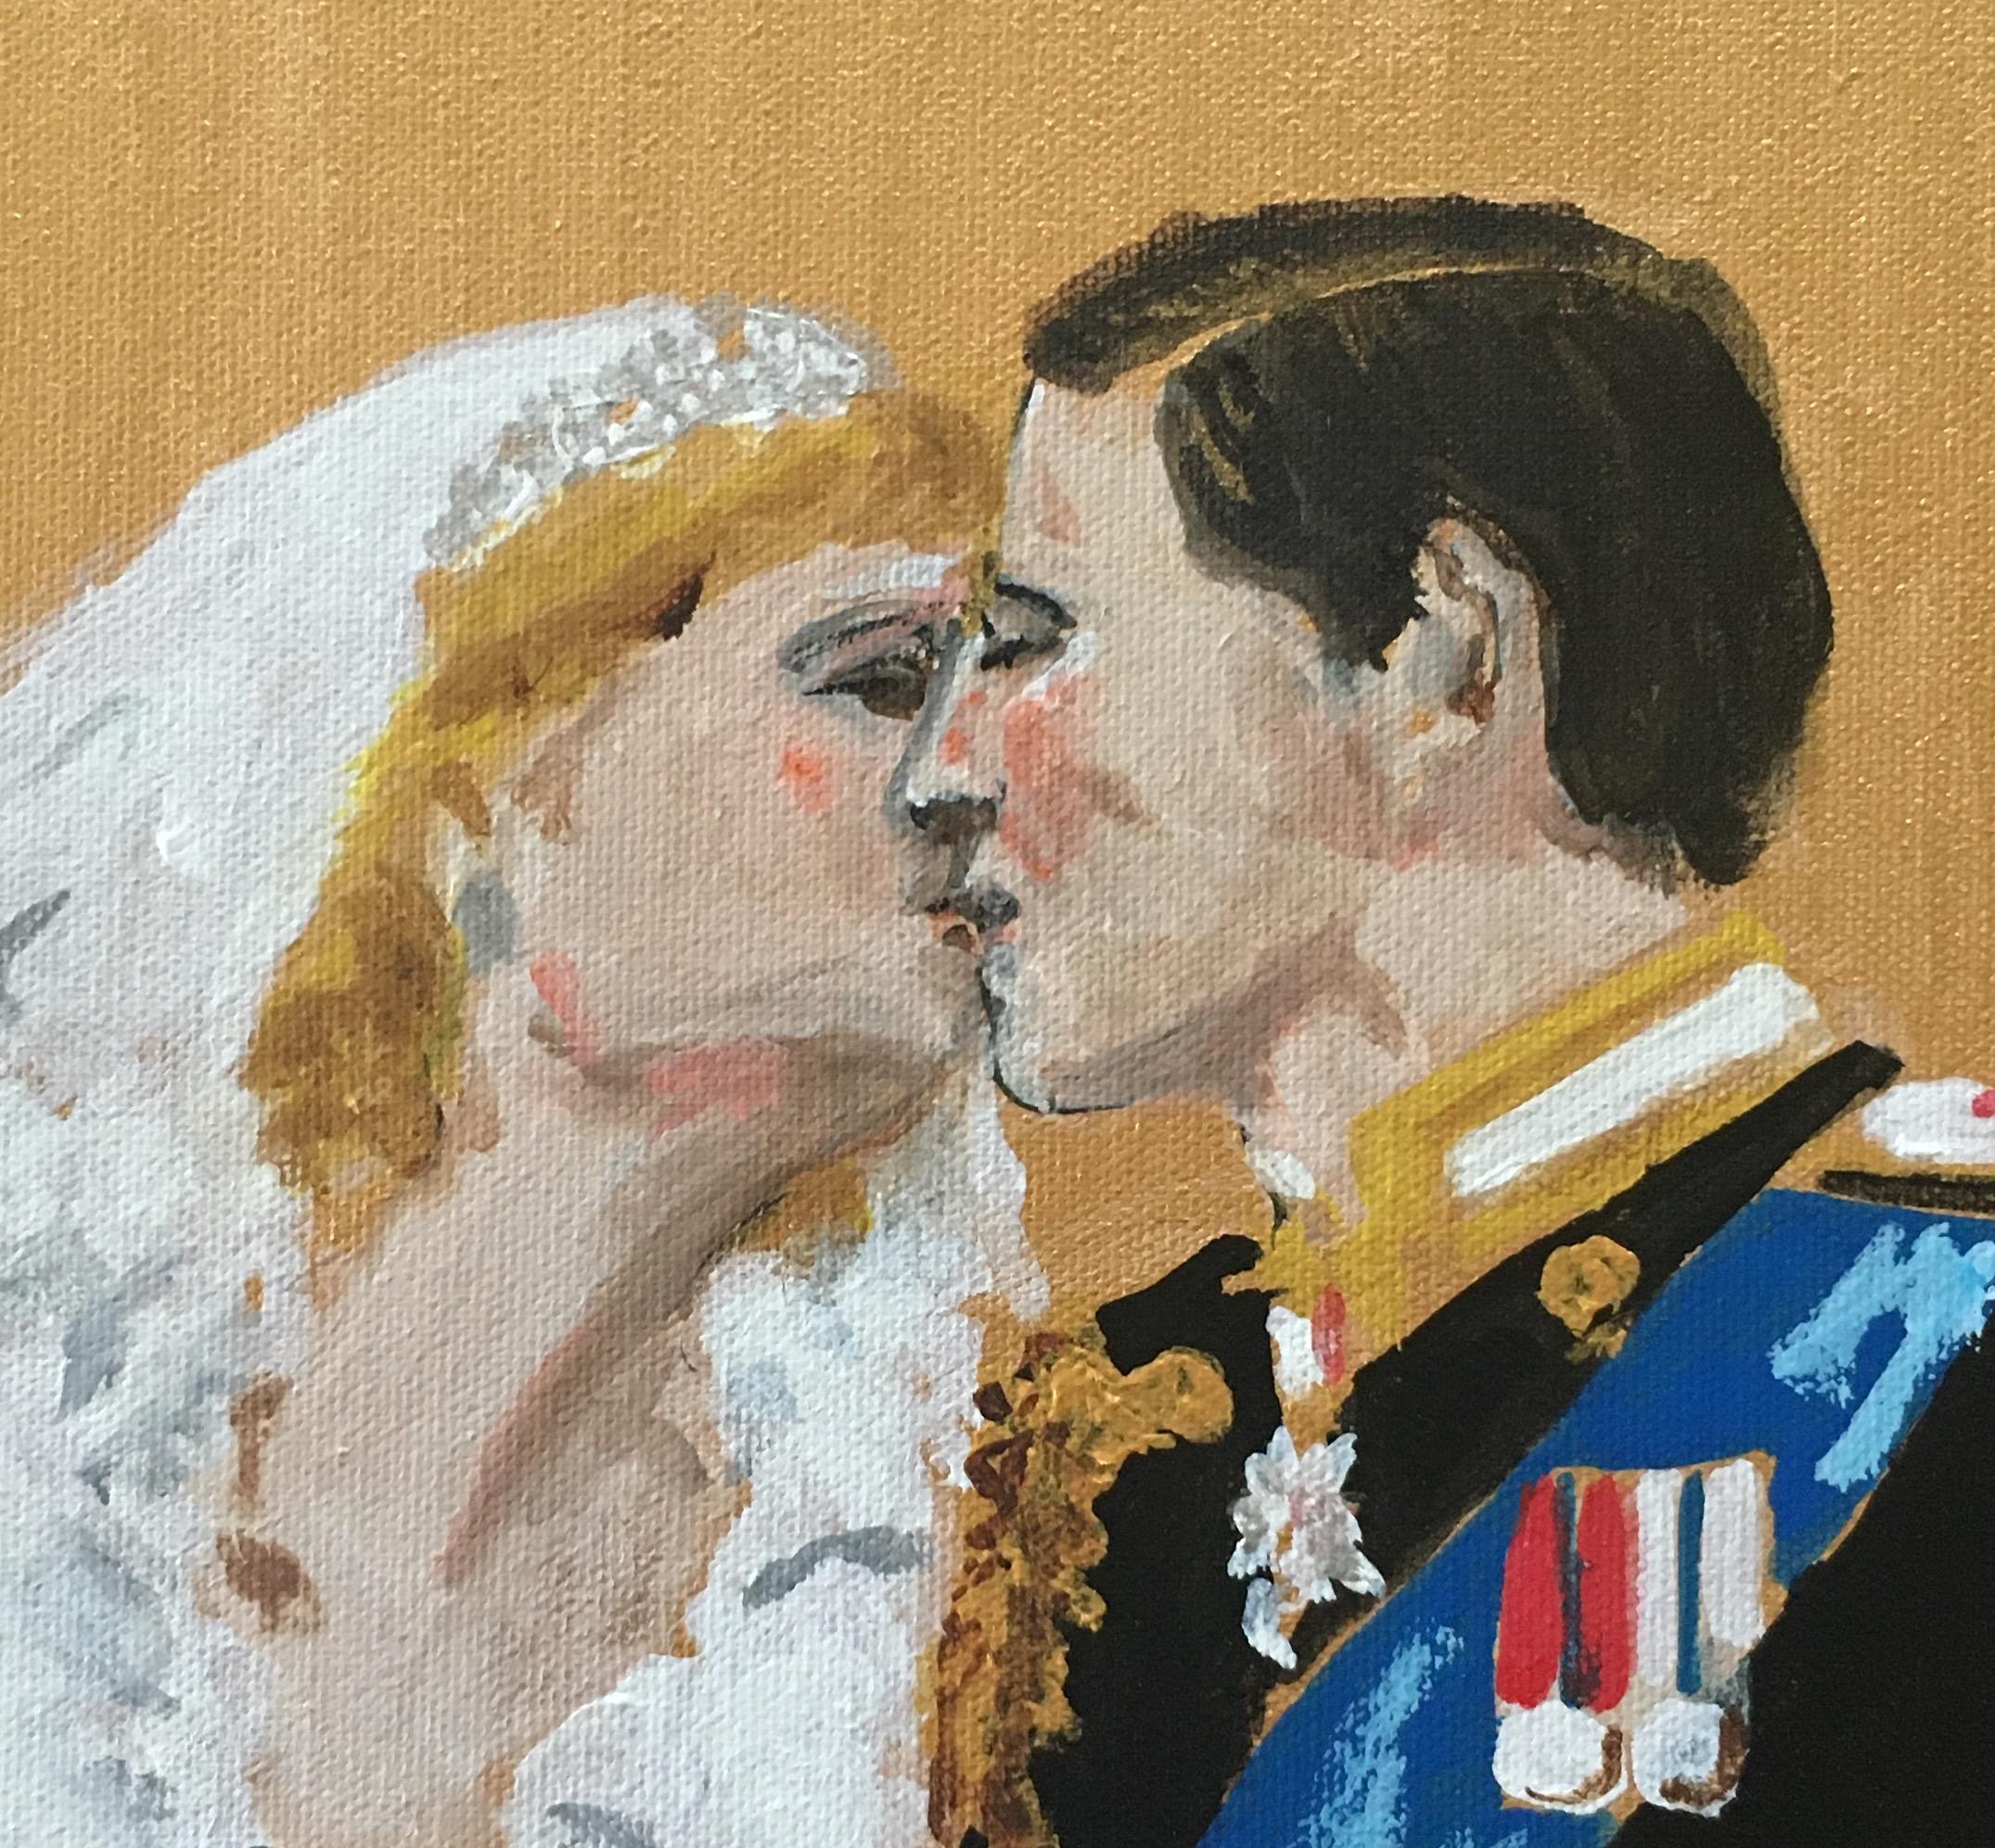 The Kiss, Princes Diana and Principe Charles weading kiss. Acrylic on Canvas. - Painting by Manuel Santelices